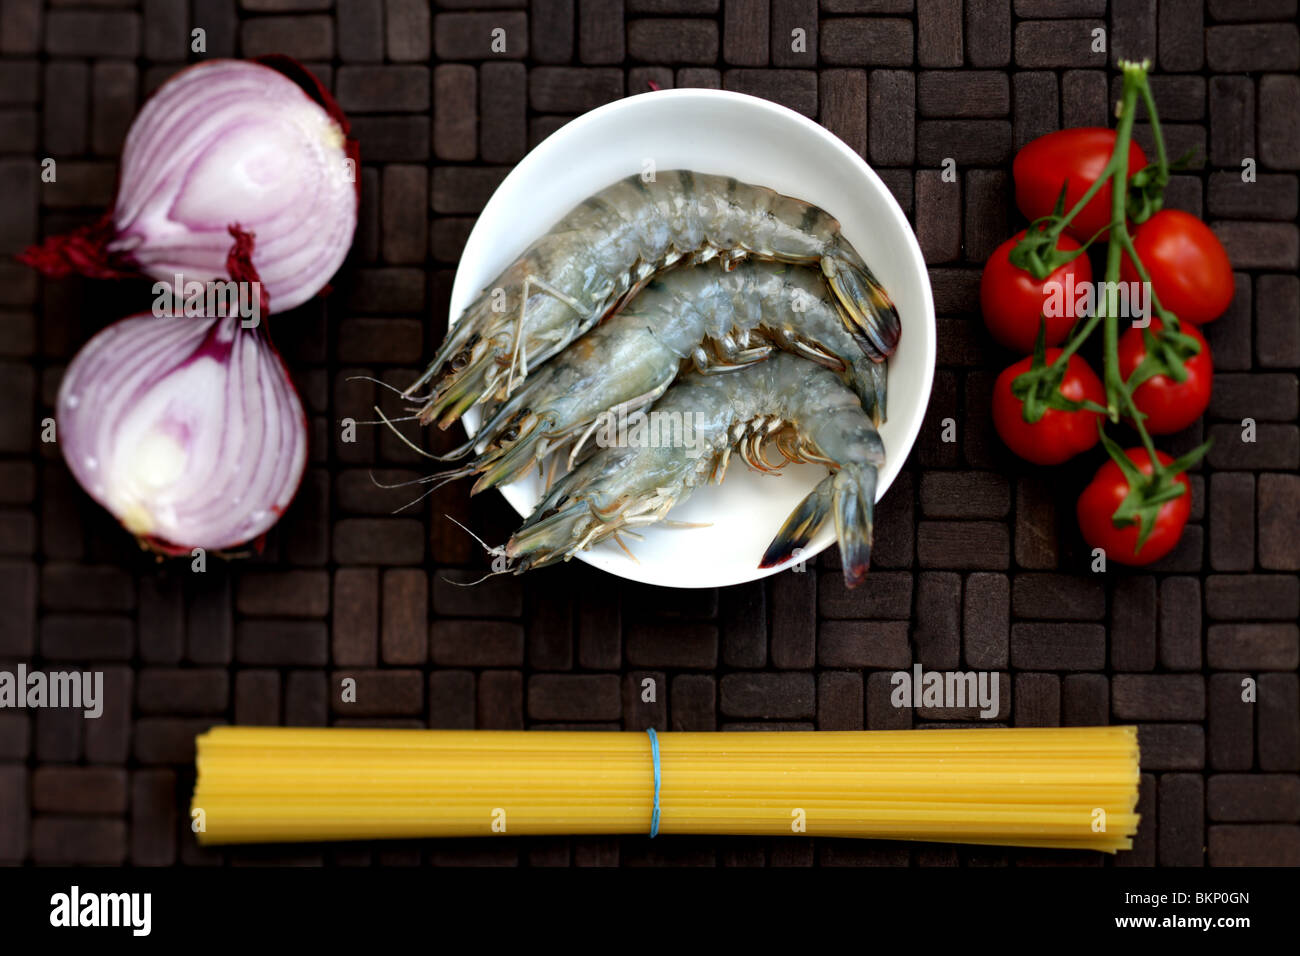 Uncooked Raw Fresh King Prawns With Linguine Pasta And Vine Tomatoes With No People On A Table Top Setting Stock Photo